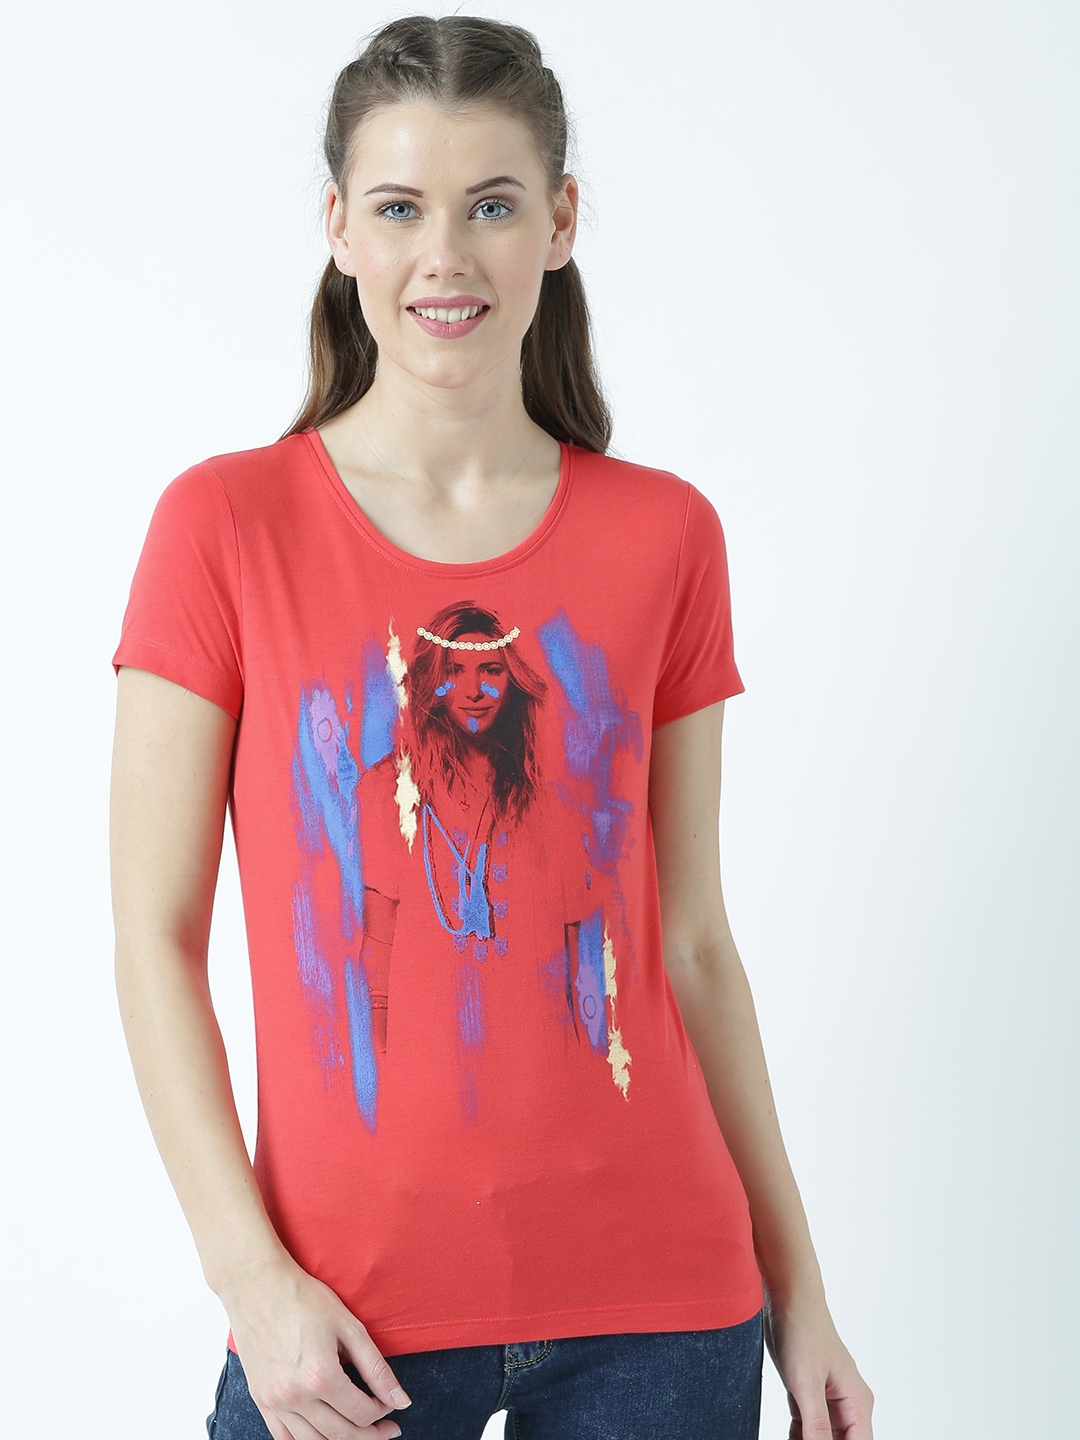 HUETRAP | Pink Soaked In Colors But Still A Pretty Face T-shirt